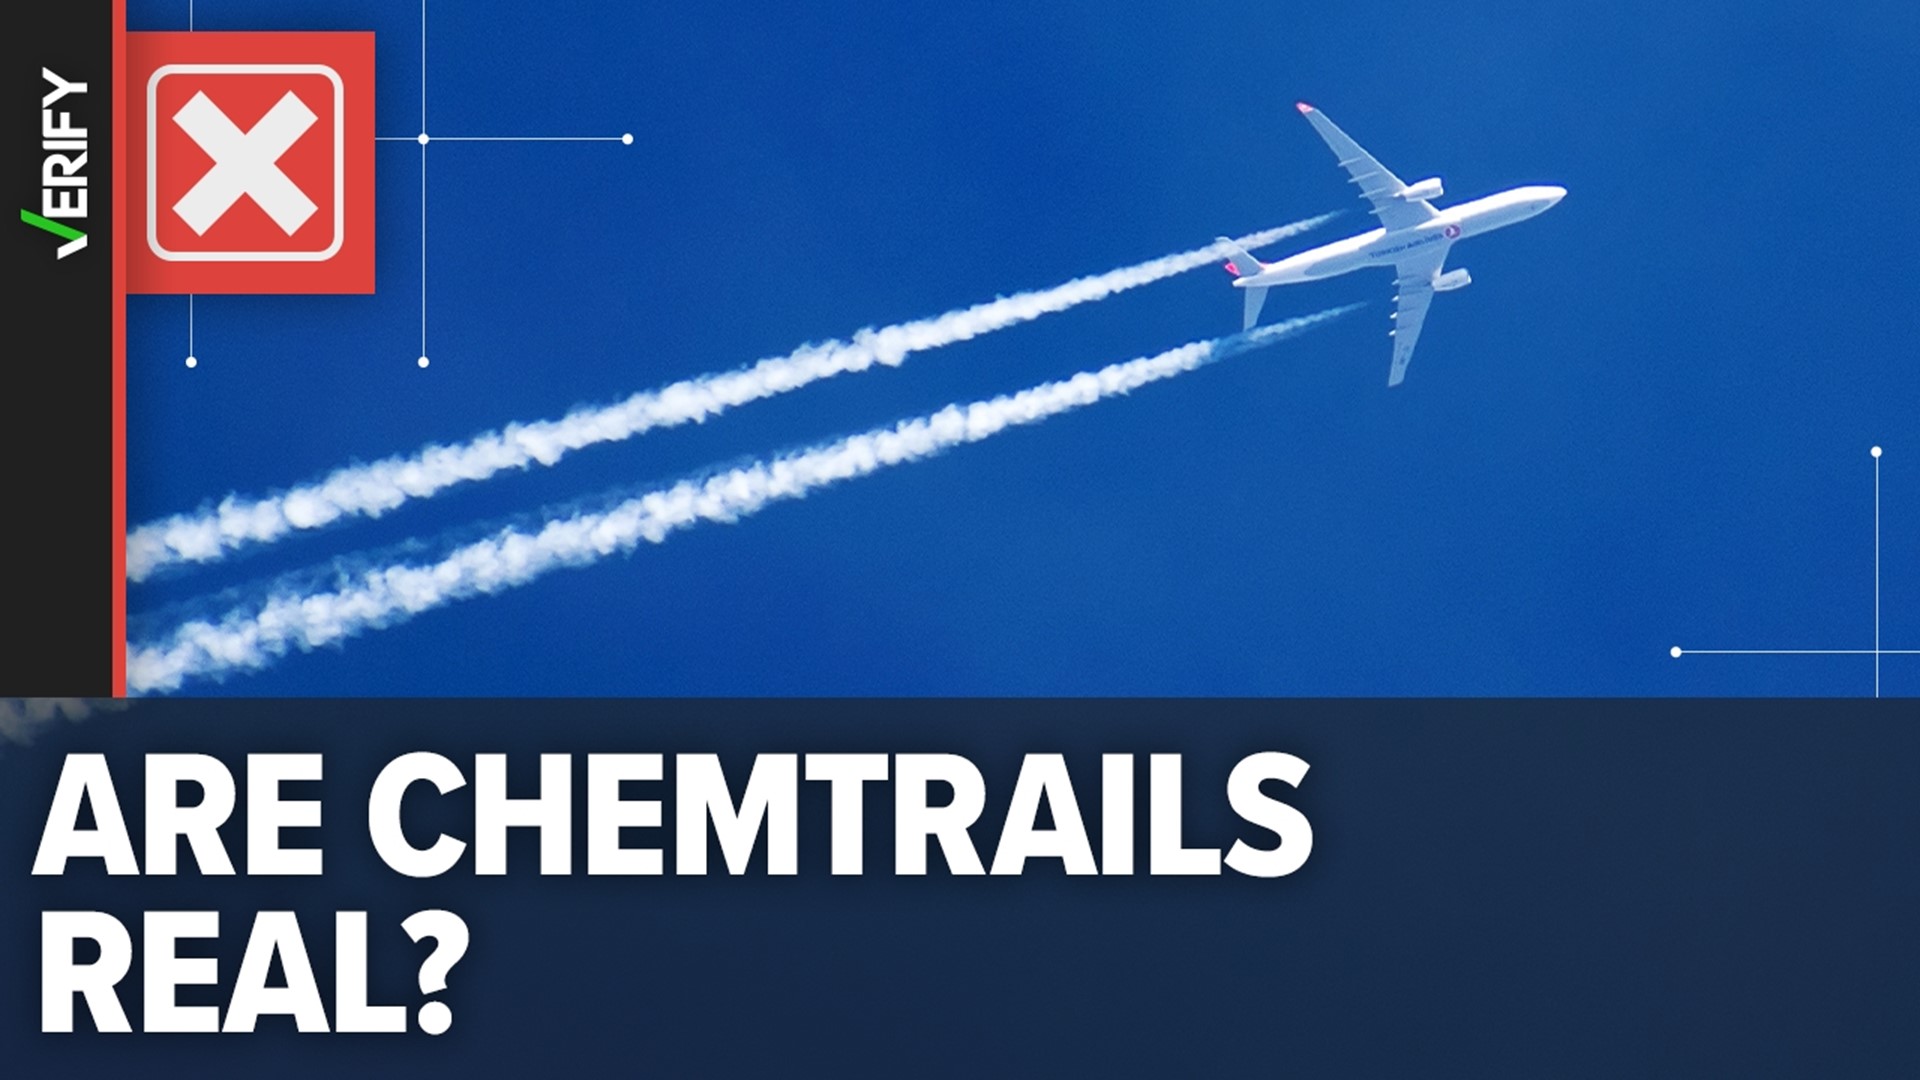 The chemtrails conspiracy theory has been shared online widely, including by Kylie Jenner. Contrails are behind planes - not chemtrails.